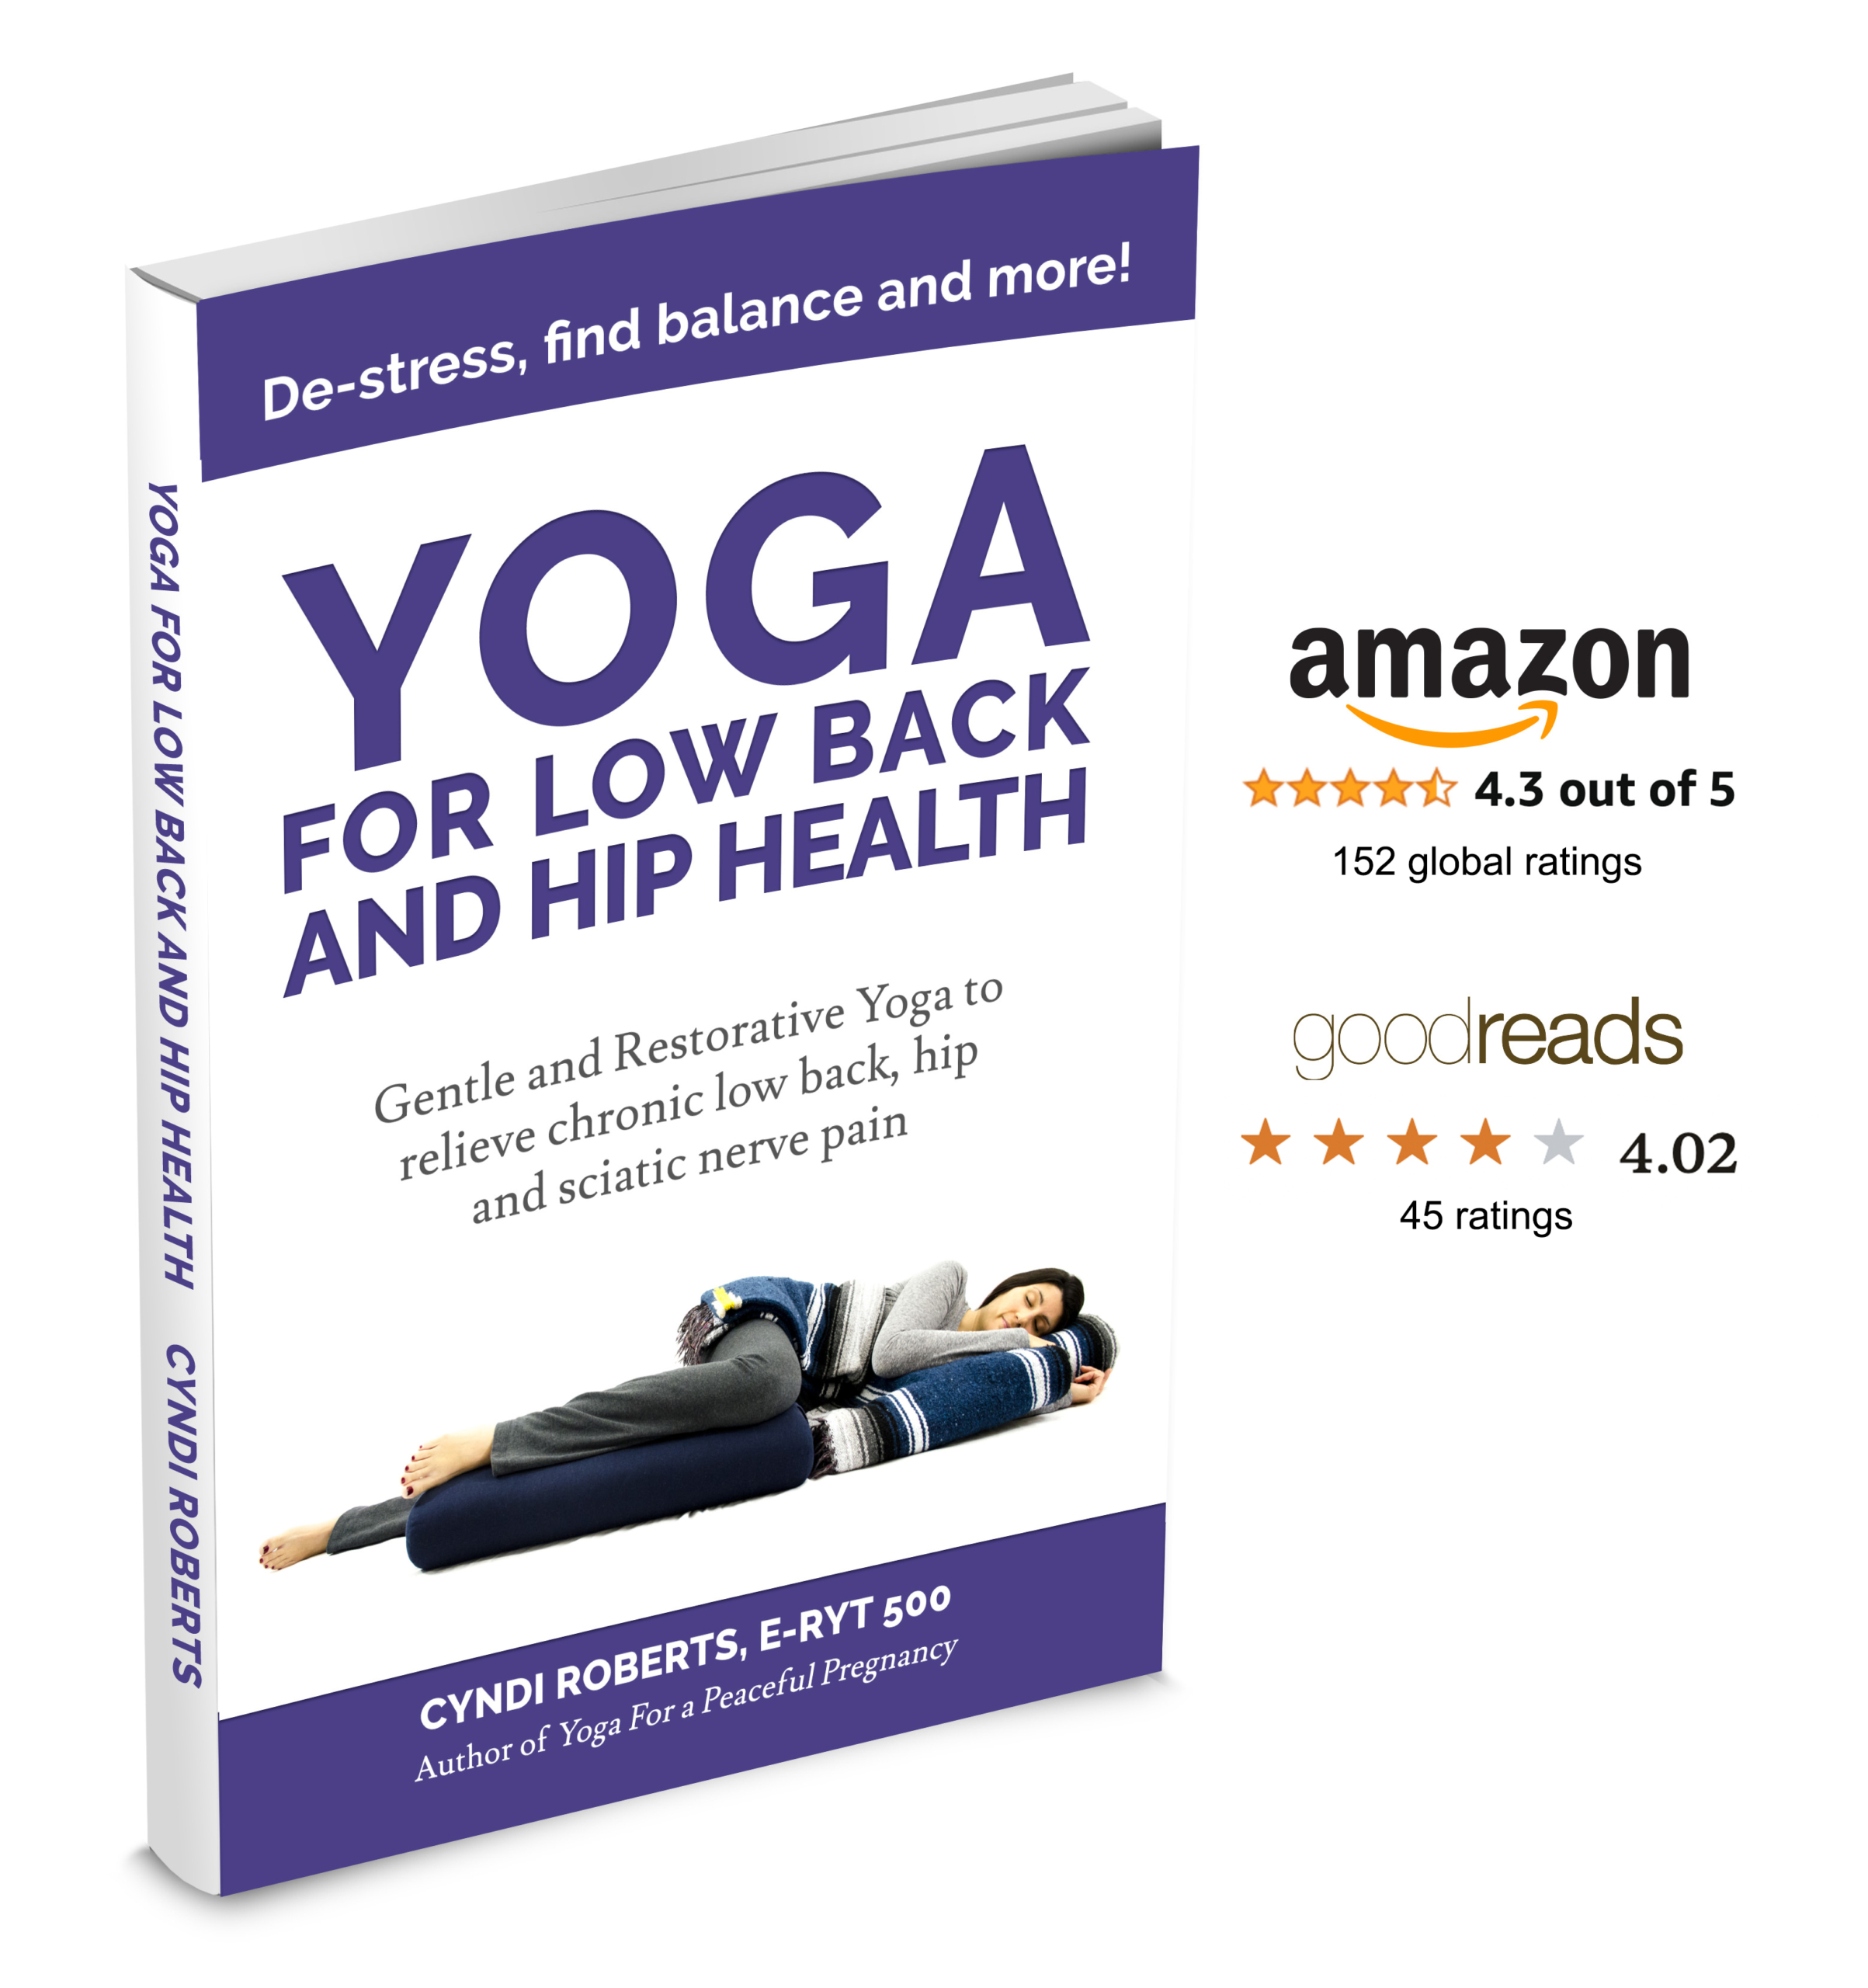 Yoga for Low Back and Hip Health - instructional yoga book by Cyndi Roberts